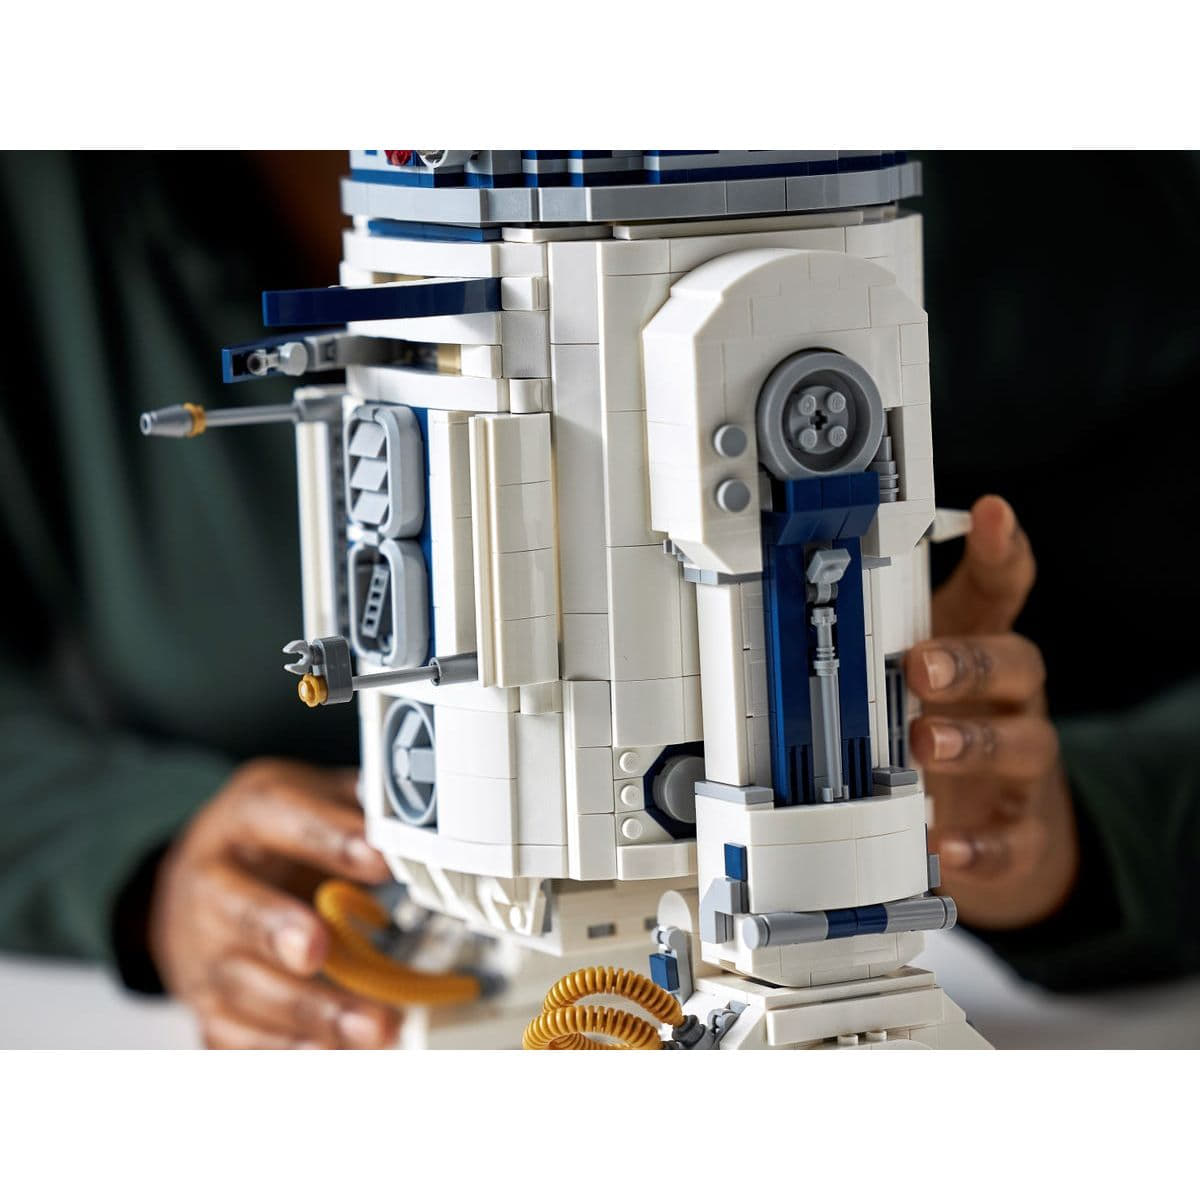 Buy LEGO® Star Wars® R2-D2 75308 Collectible Building Kit (2,315 Pieces)